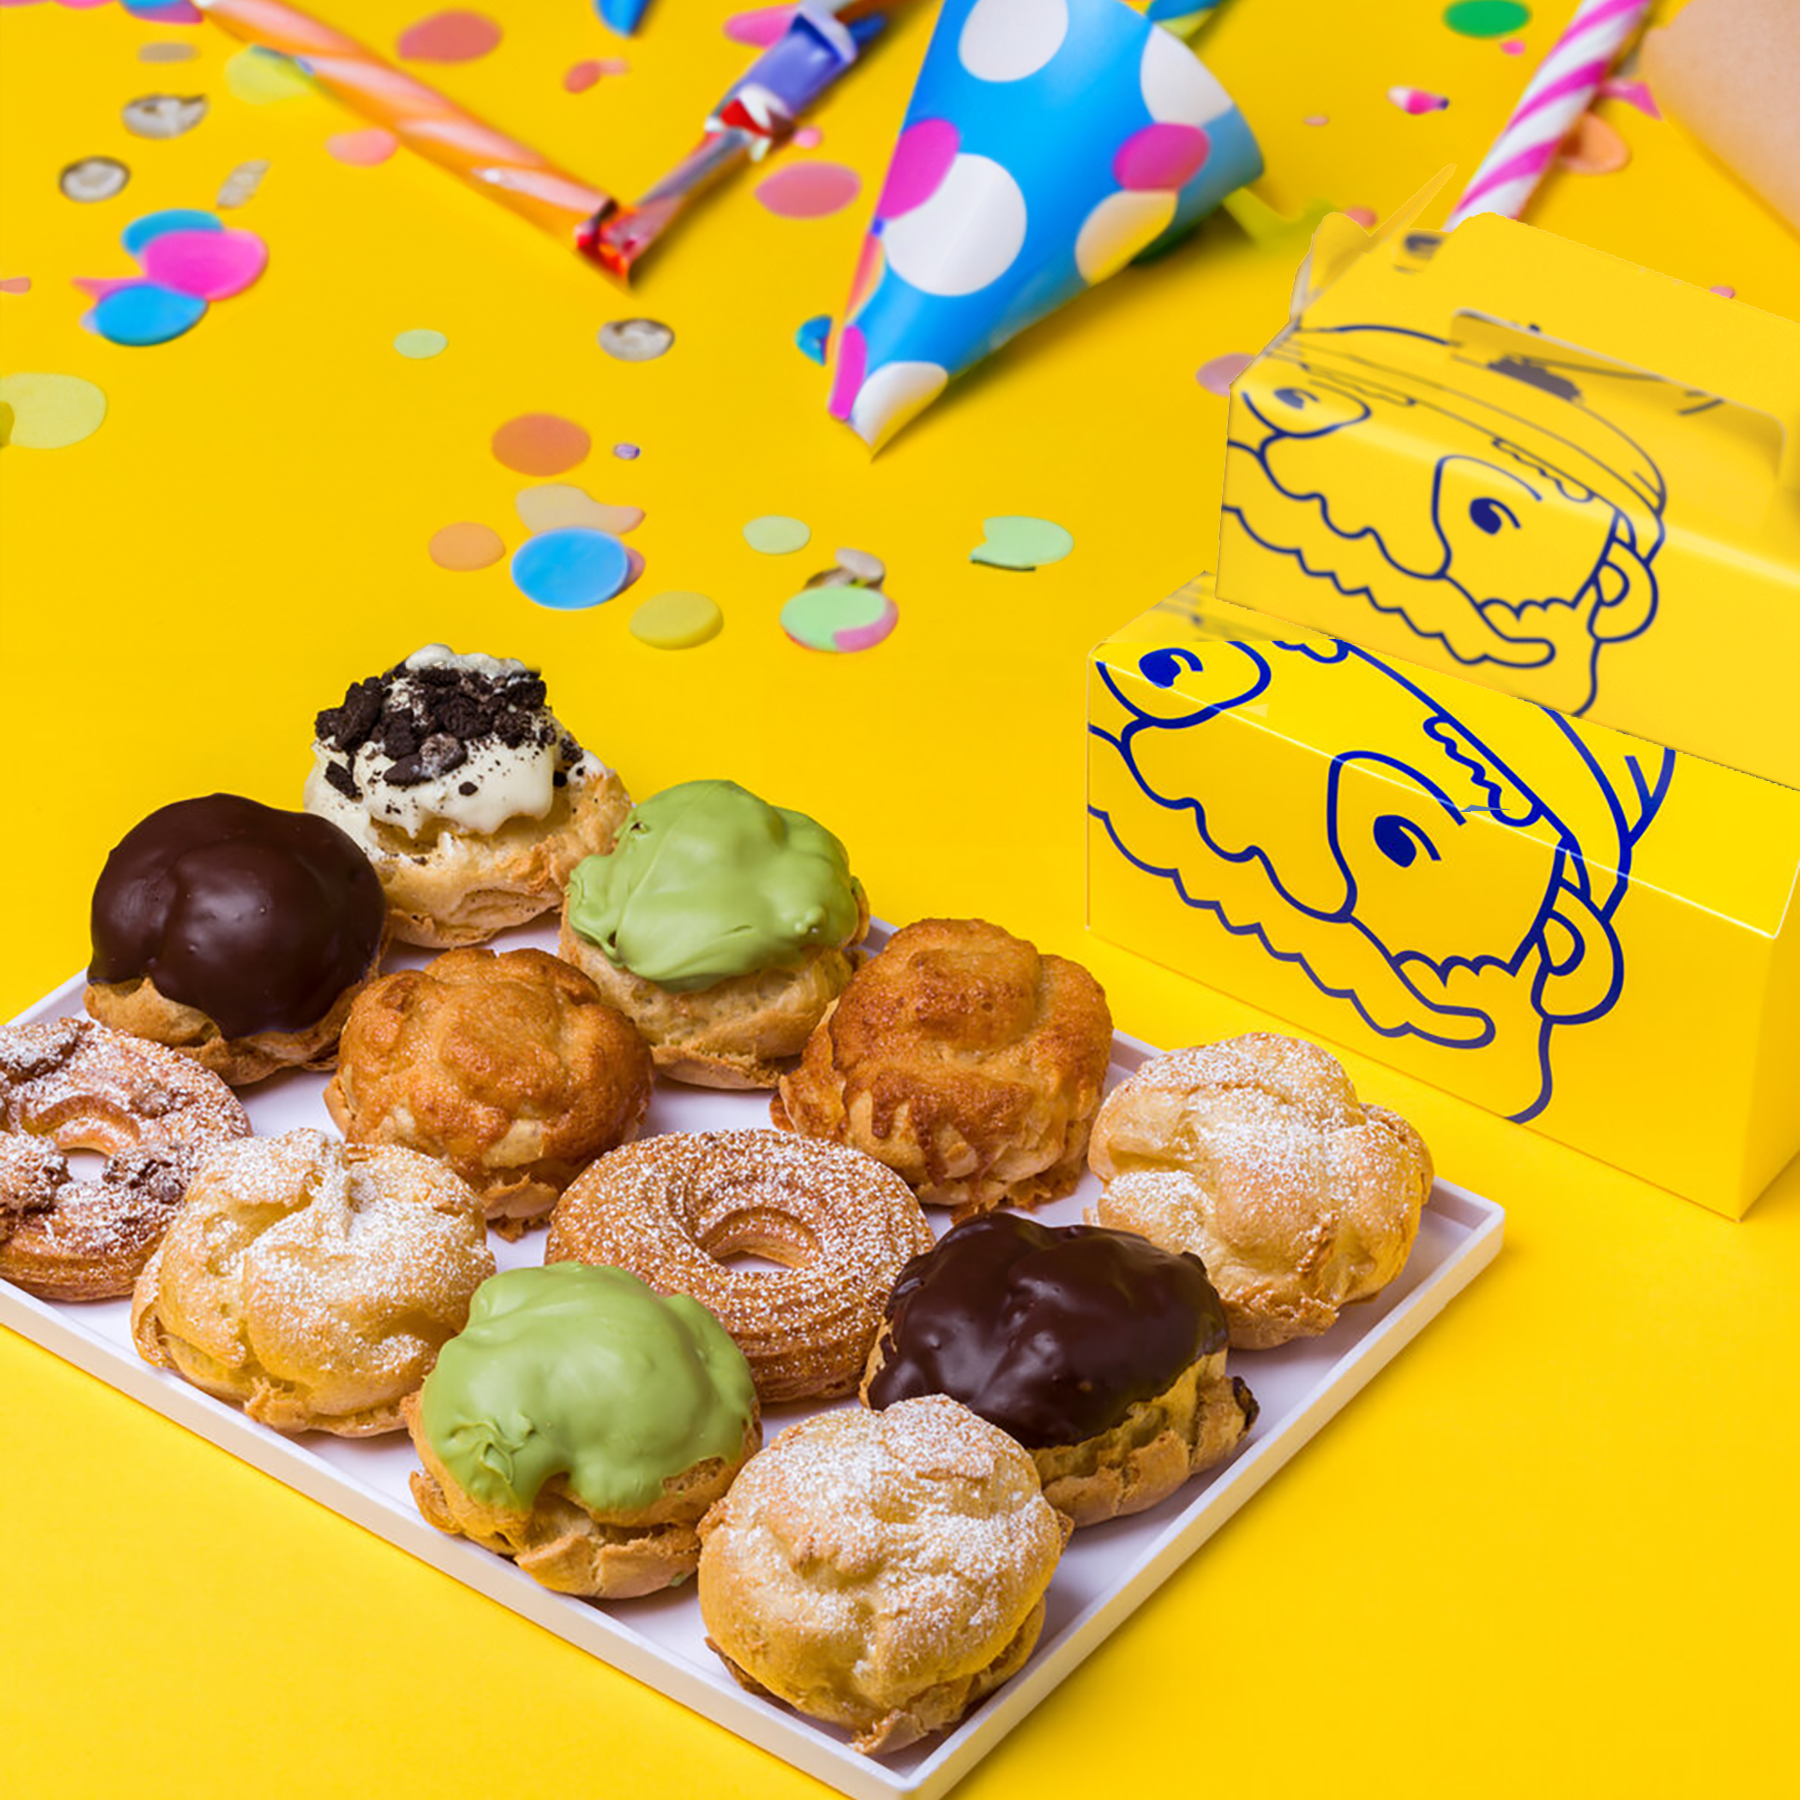 A tray of cream puffs on a yellow table.